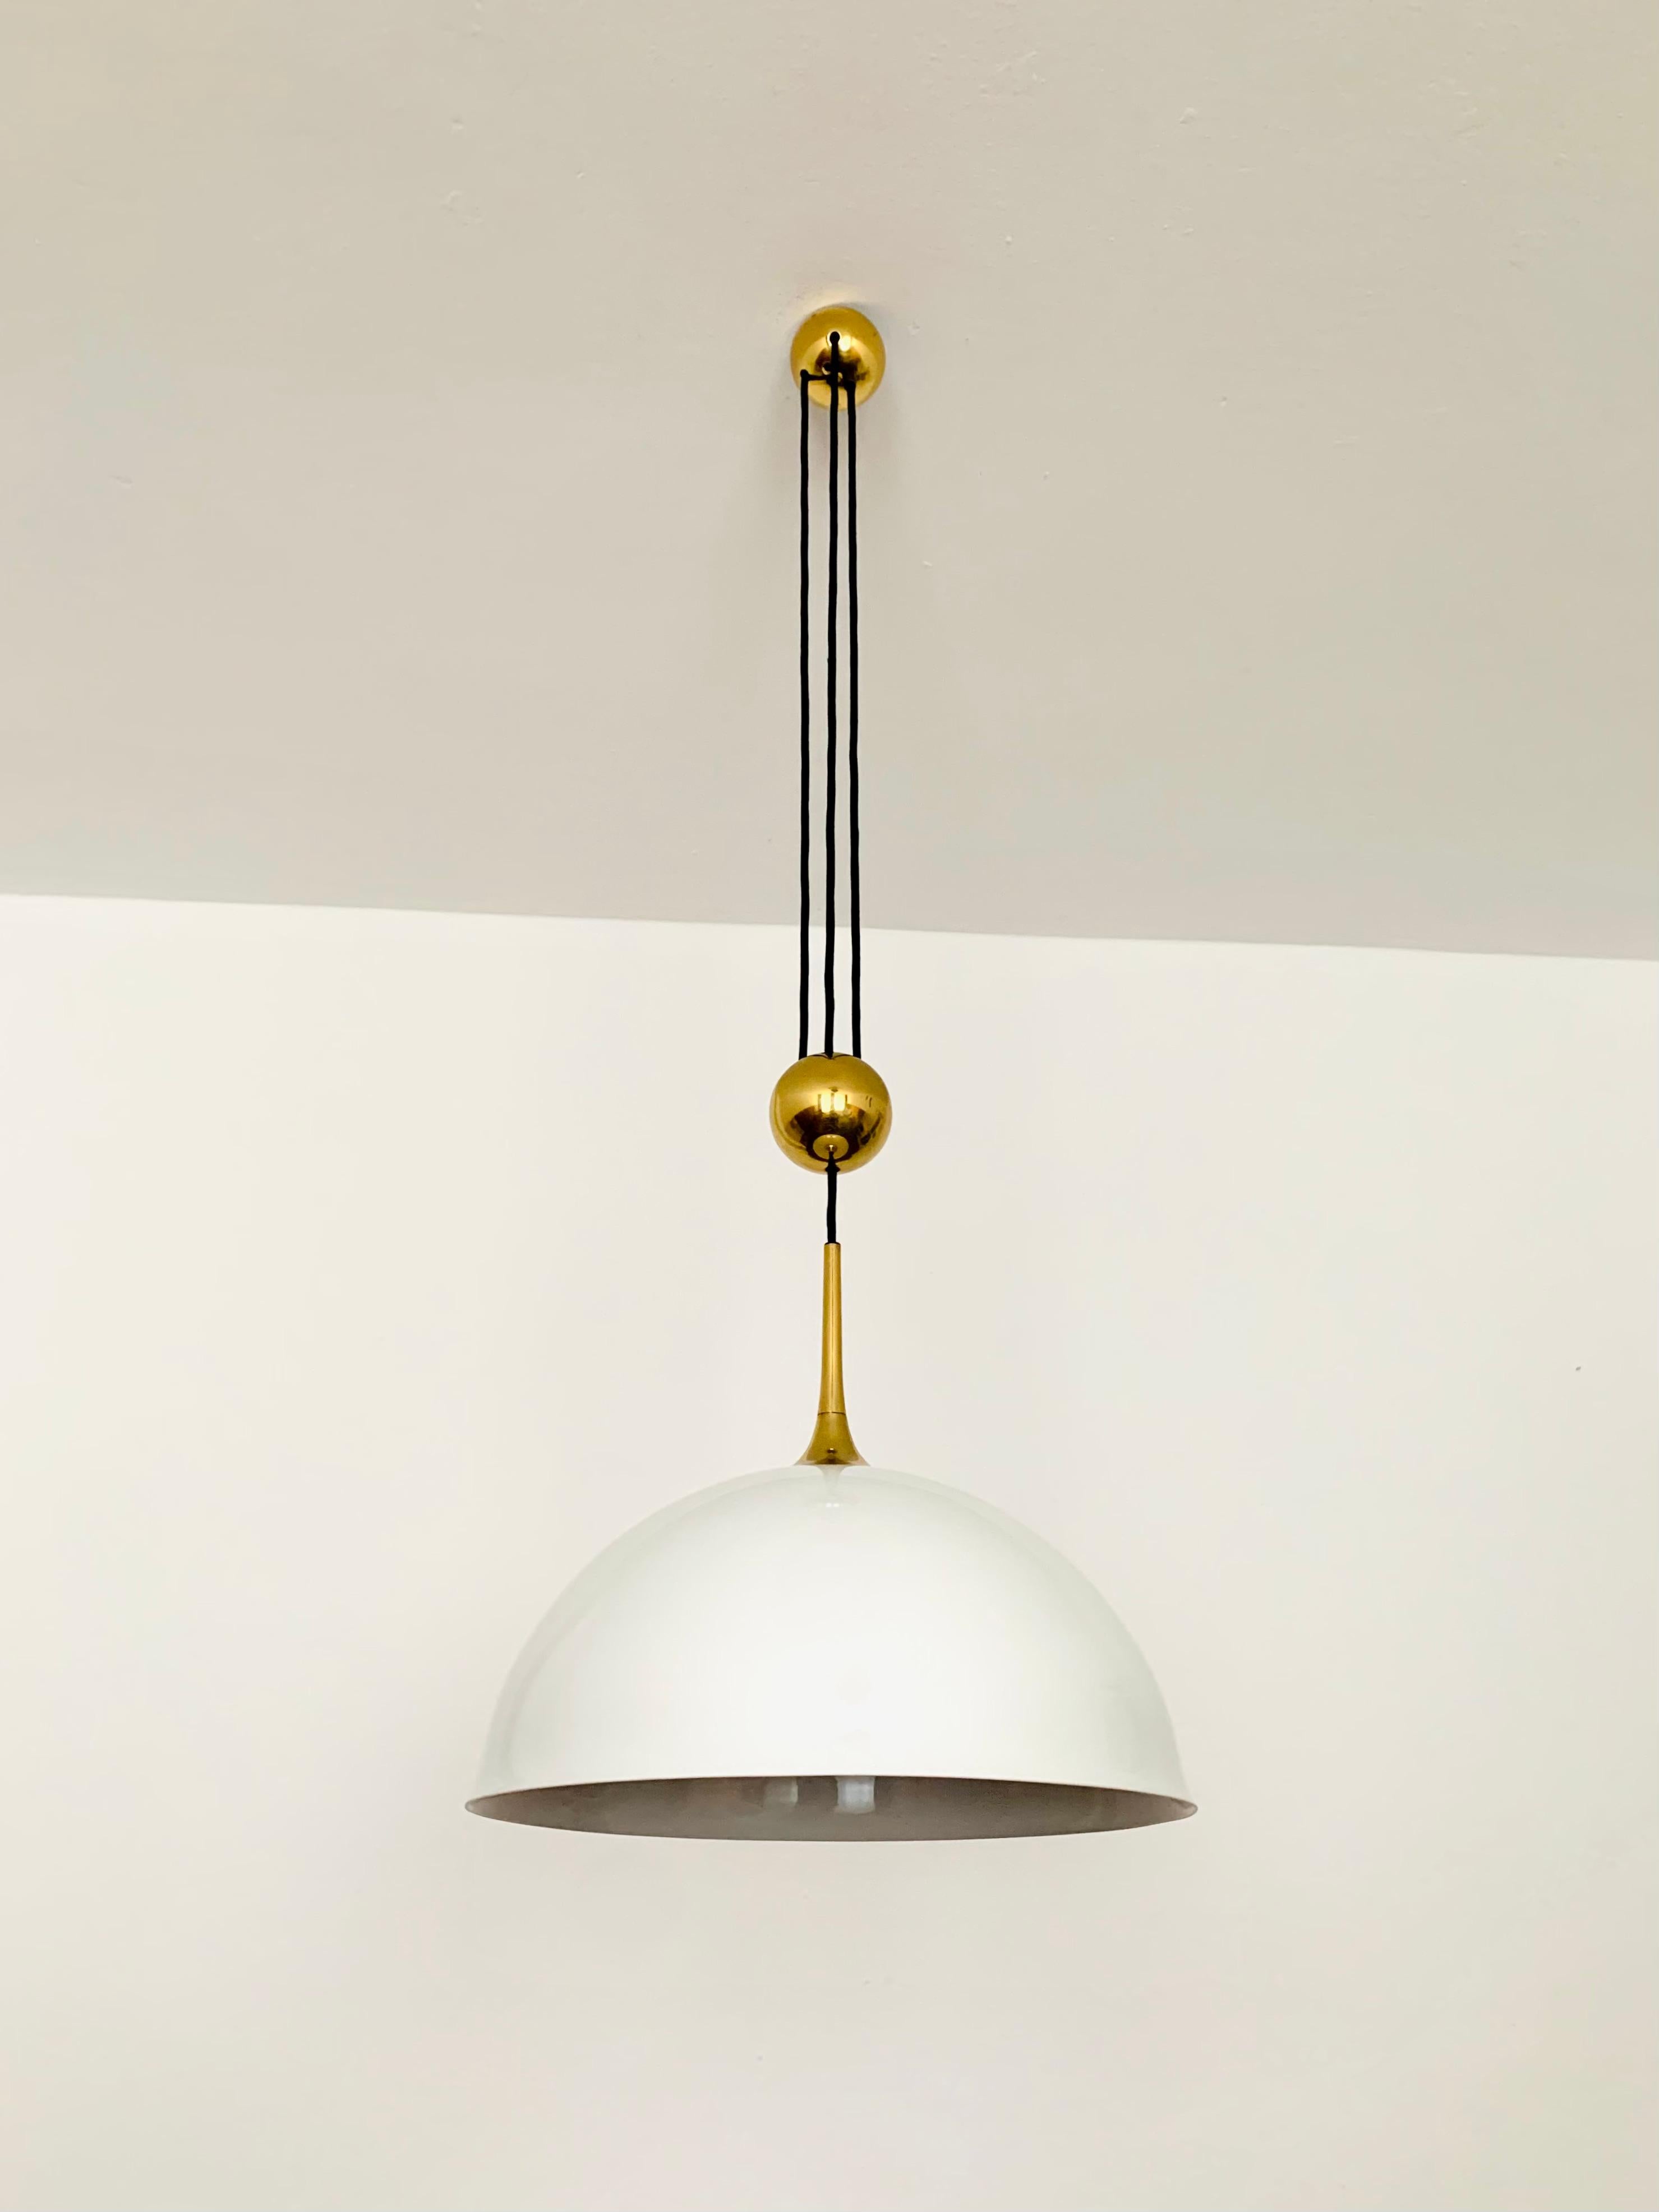 Very nice, height-adjustable pendant lamp from the 1970s.
The lighting effect of the lamp is extremely beautiful.
The design and the very beautiful details create a very noble and pleasant light.
The lamp creates a very cozy atmosphere and is of